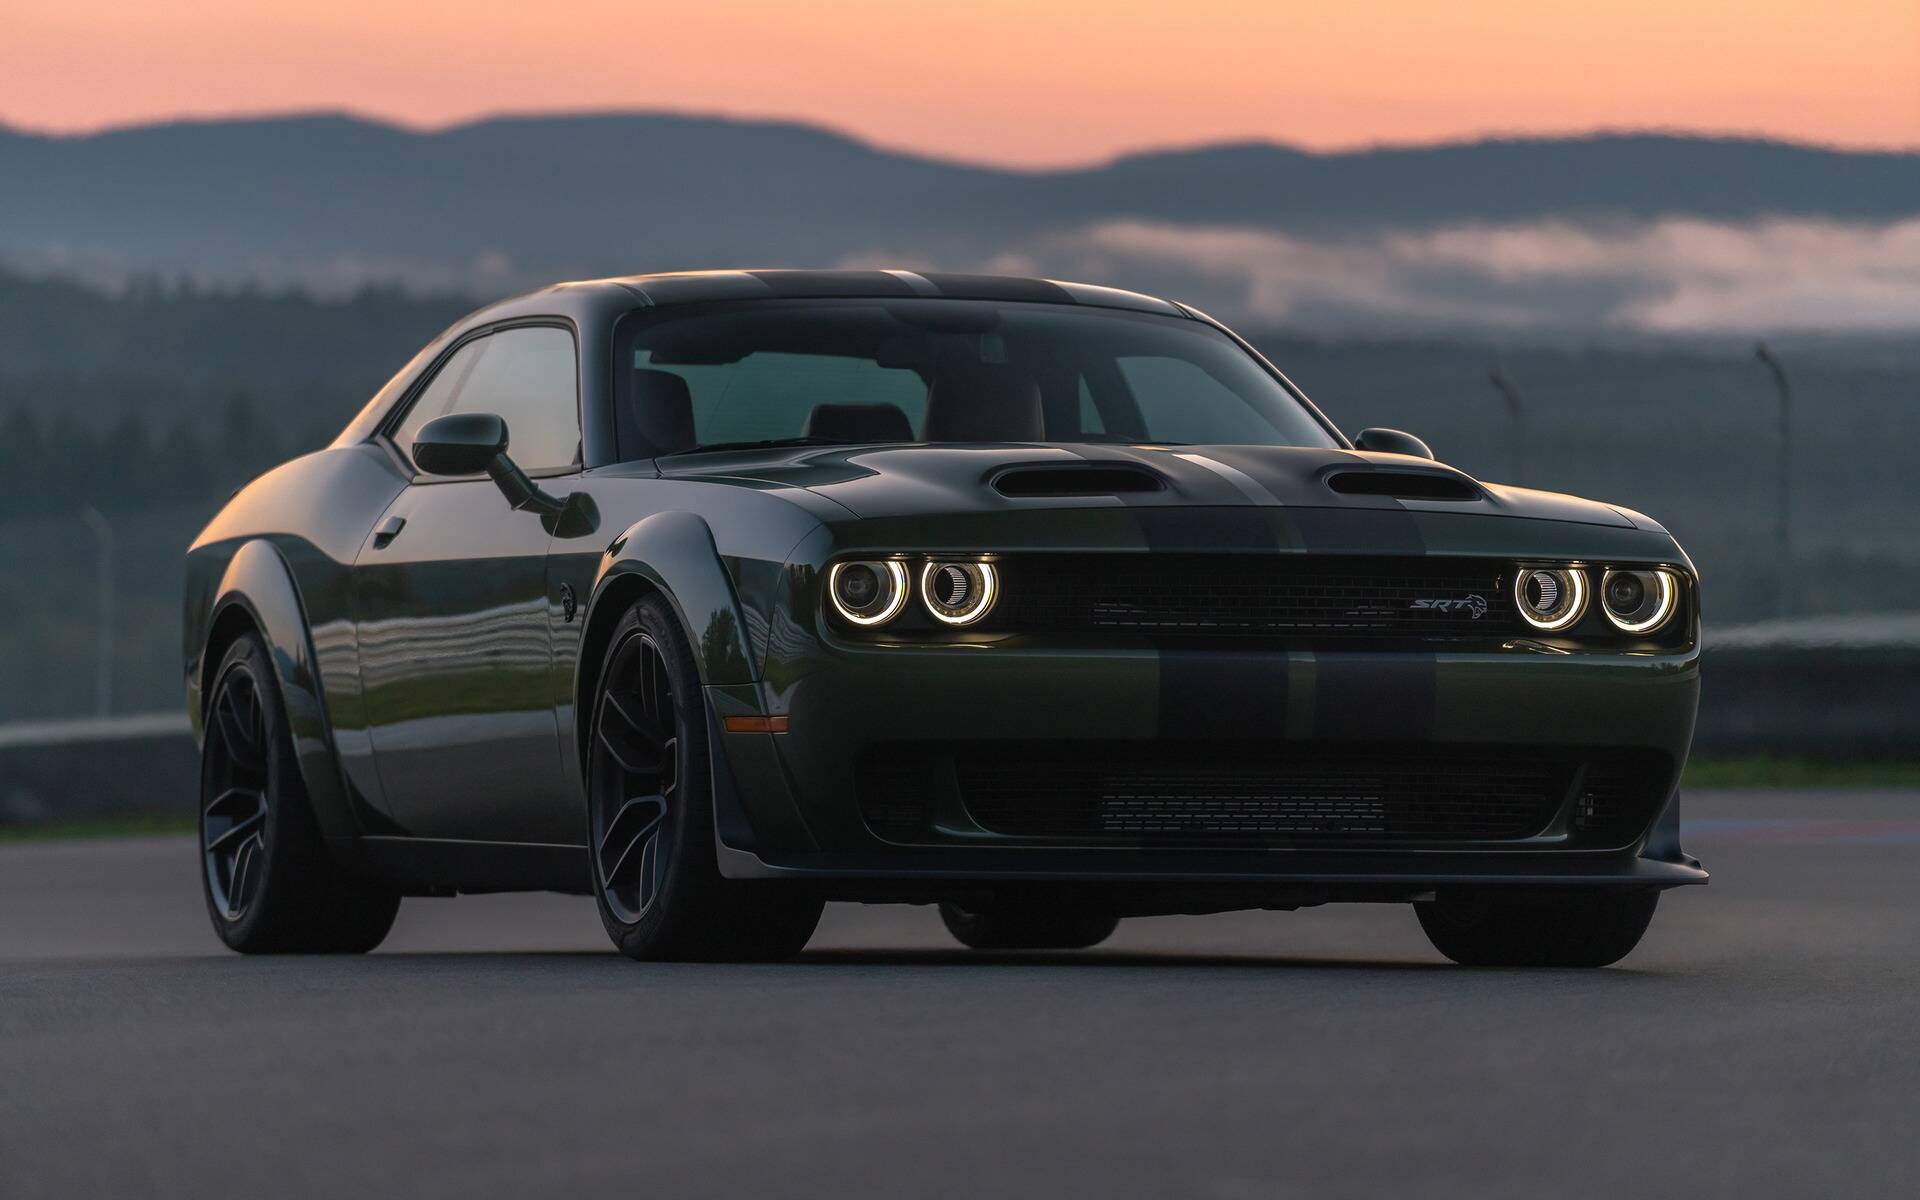 Pre-Owned Dodge Challenger : What Trim Should You Get? - The Car Guide